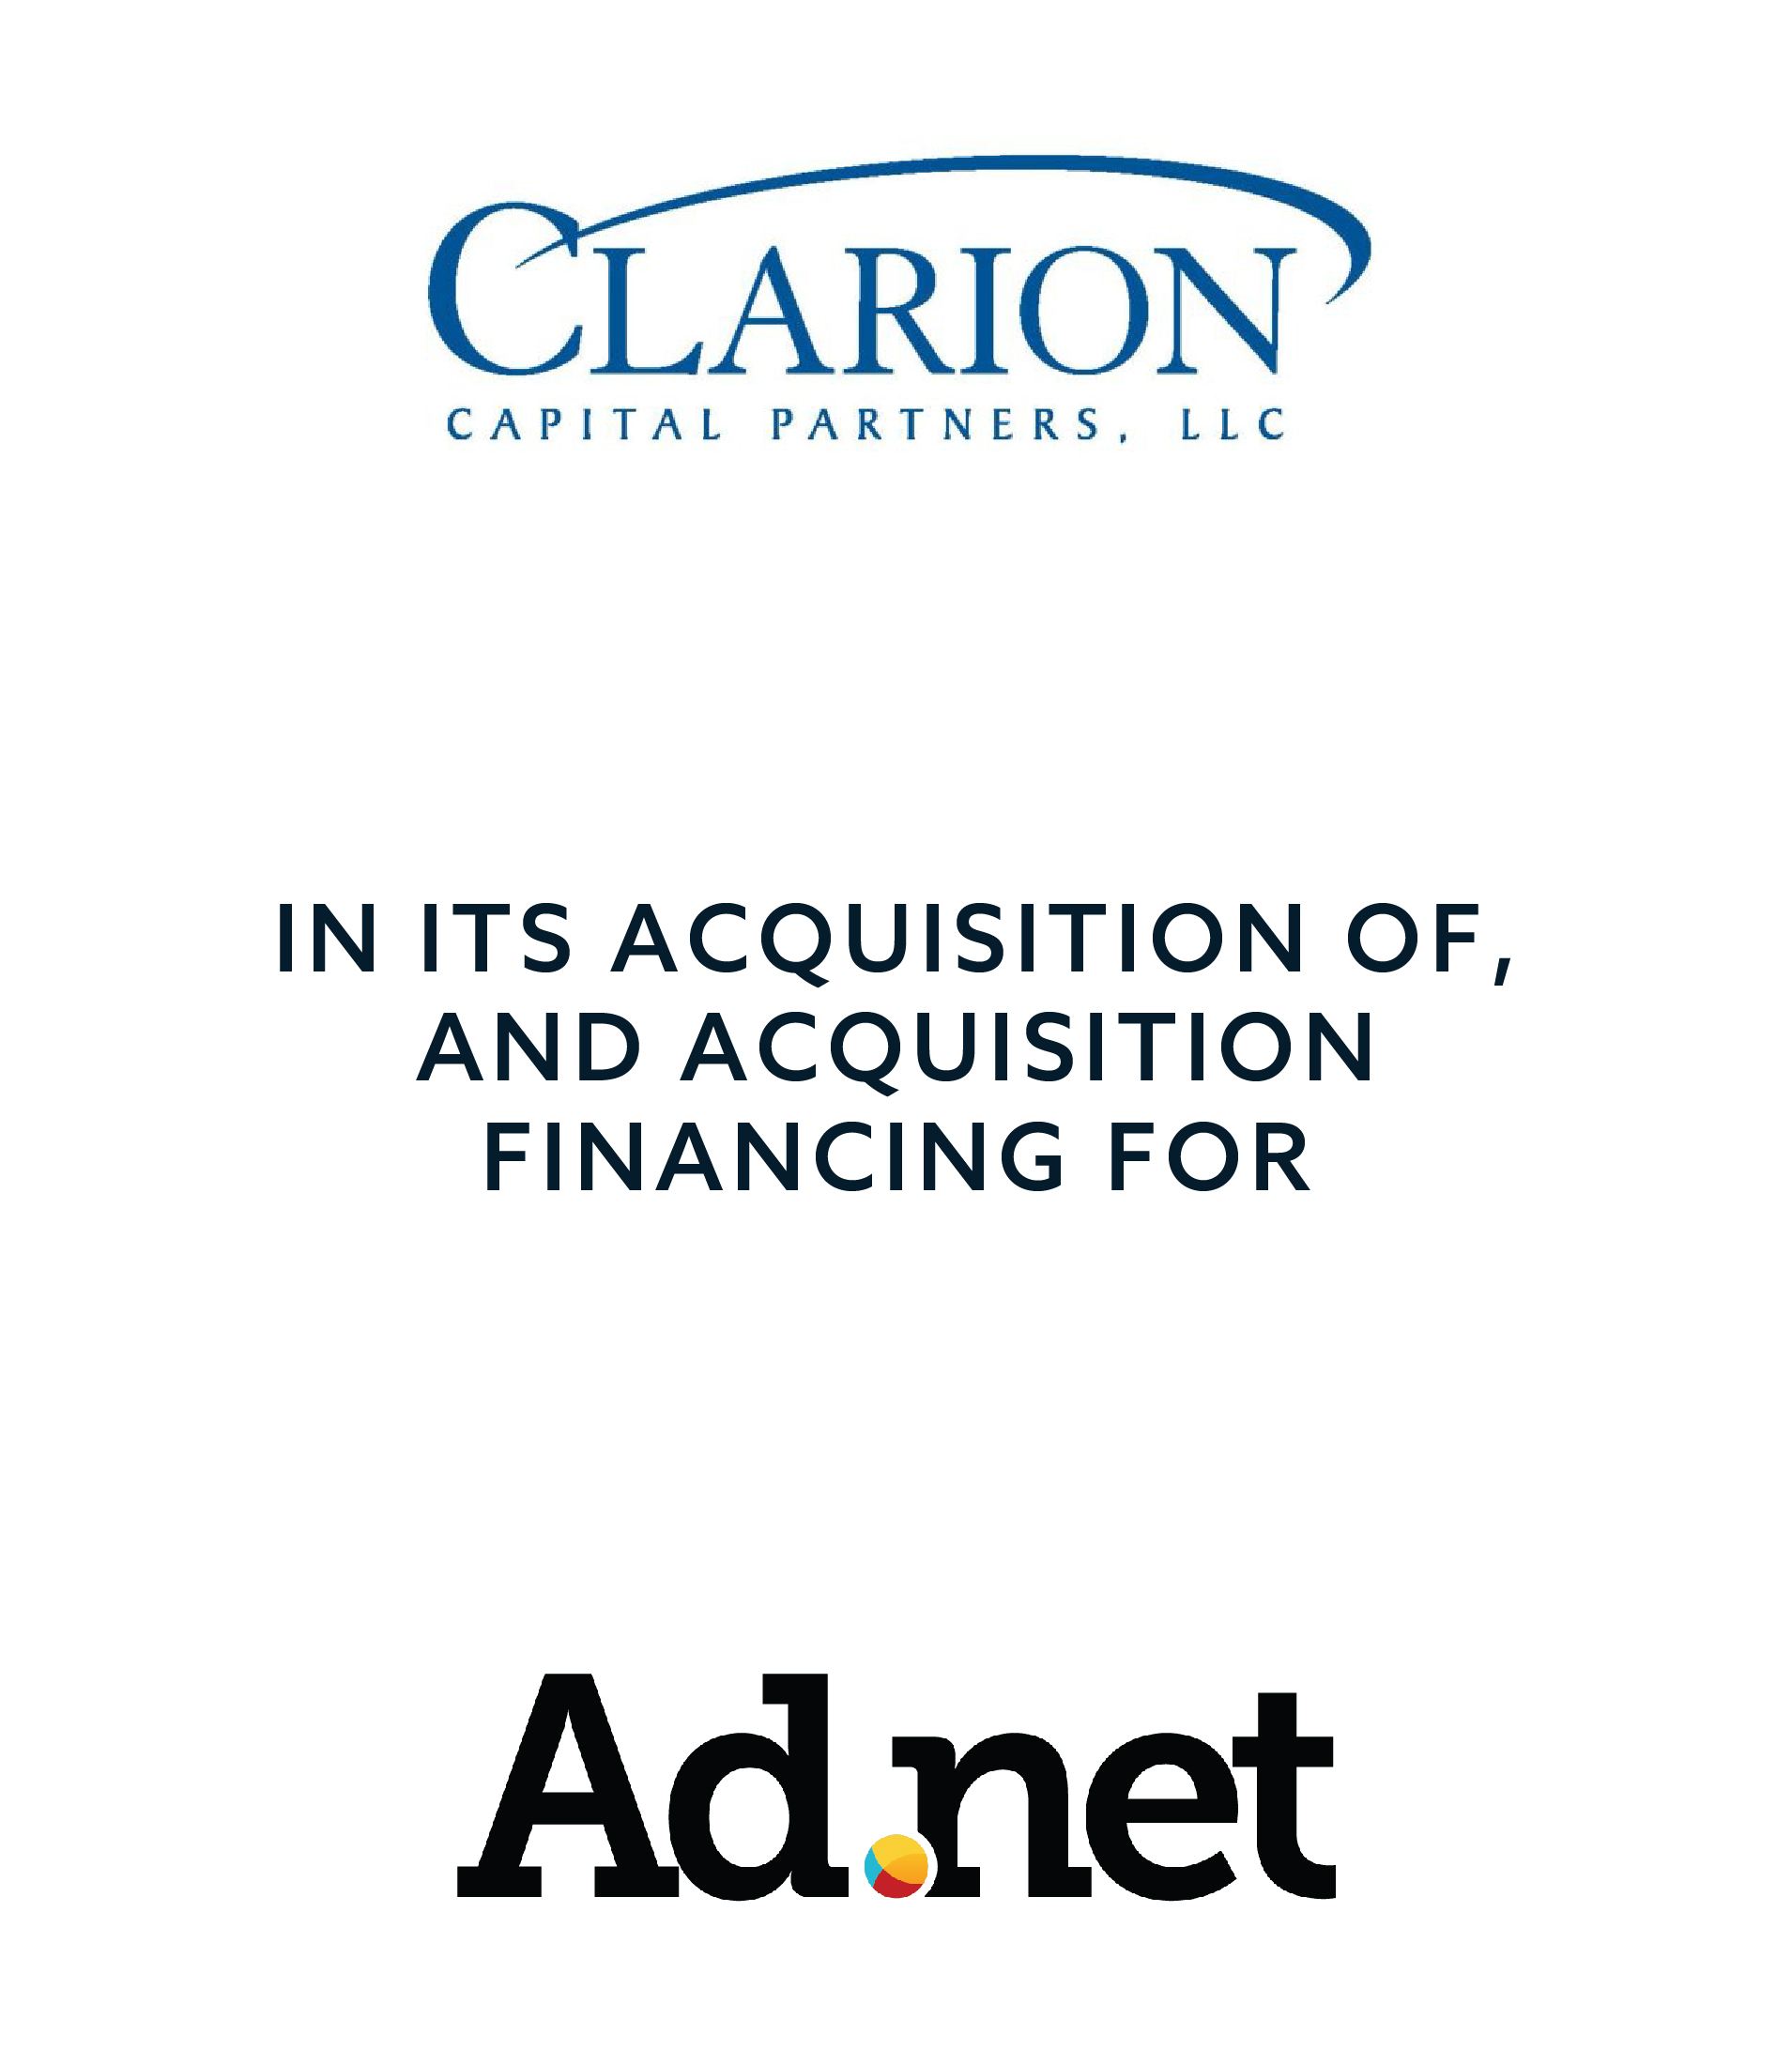 Clarion_AdNet_008987.0018